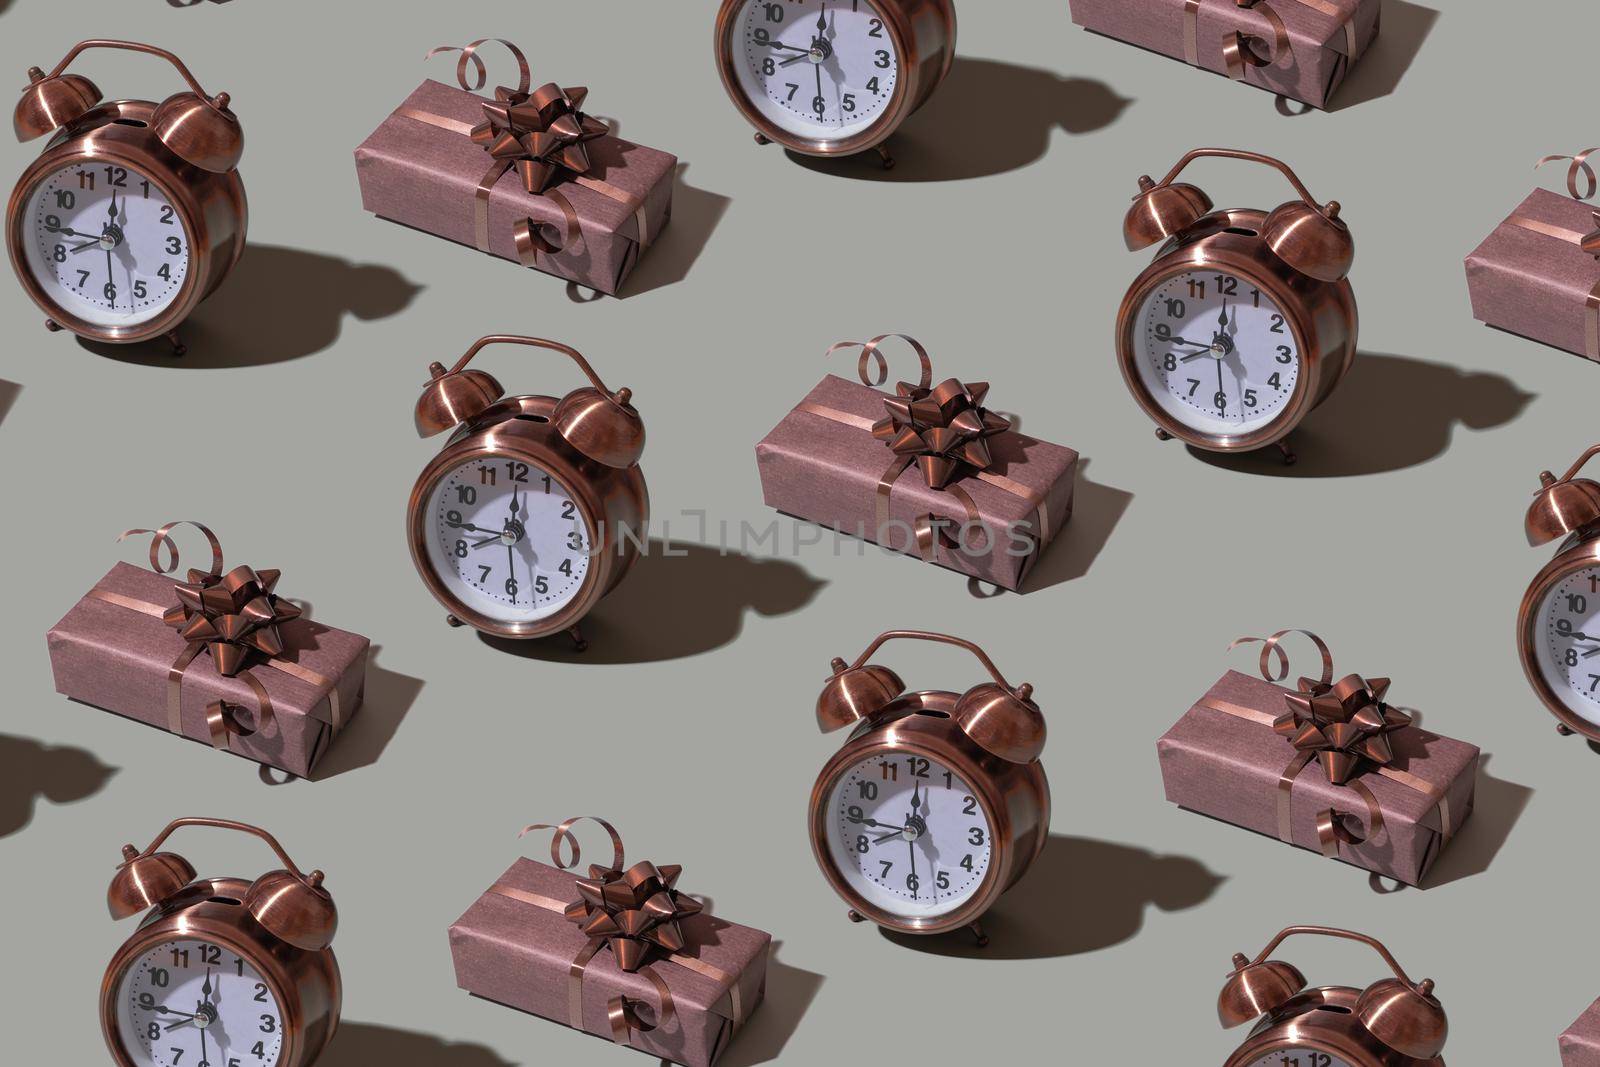 Brown gift box template with bow and alarm clock on gray background. Festive minimalistic concept.